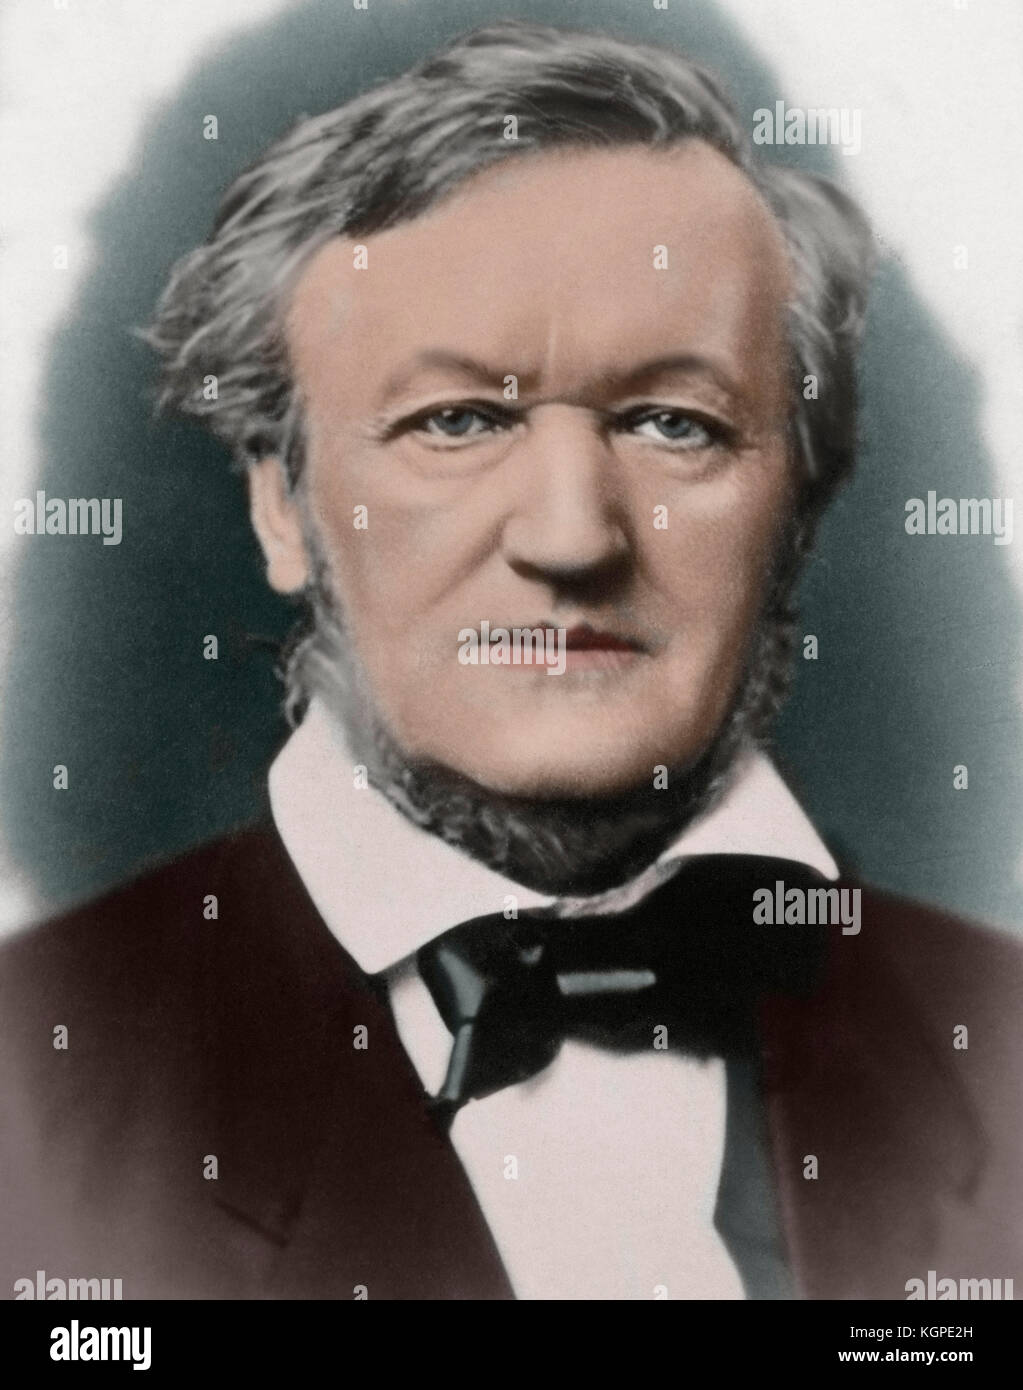 Richard Wagner (1813-1883).  German composer. Portrait. Photography. Colored. Stock Photo